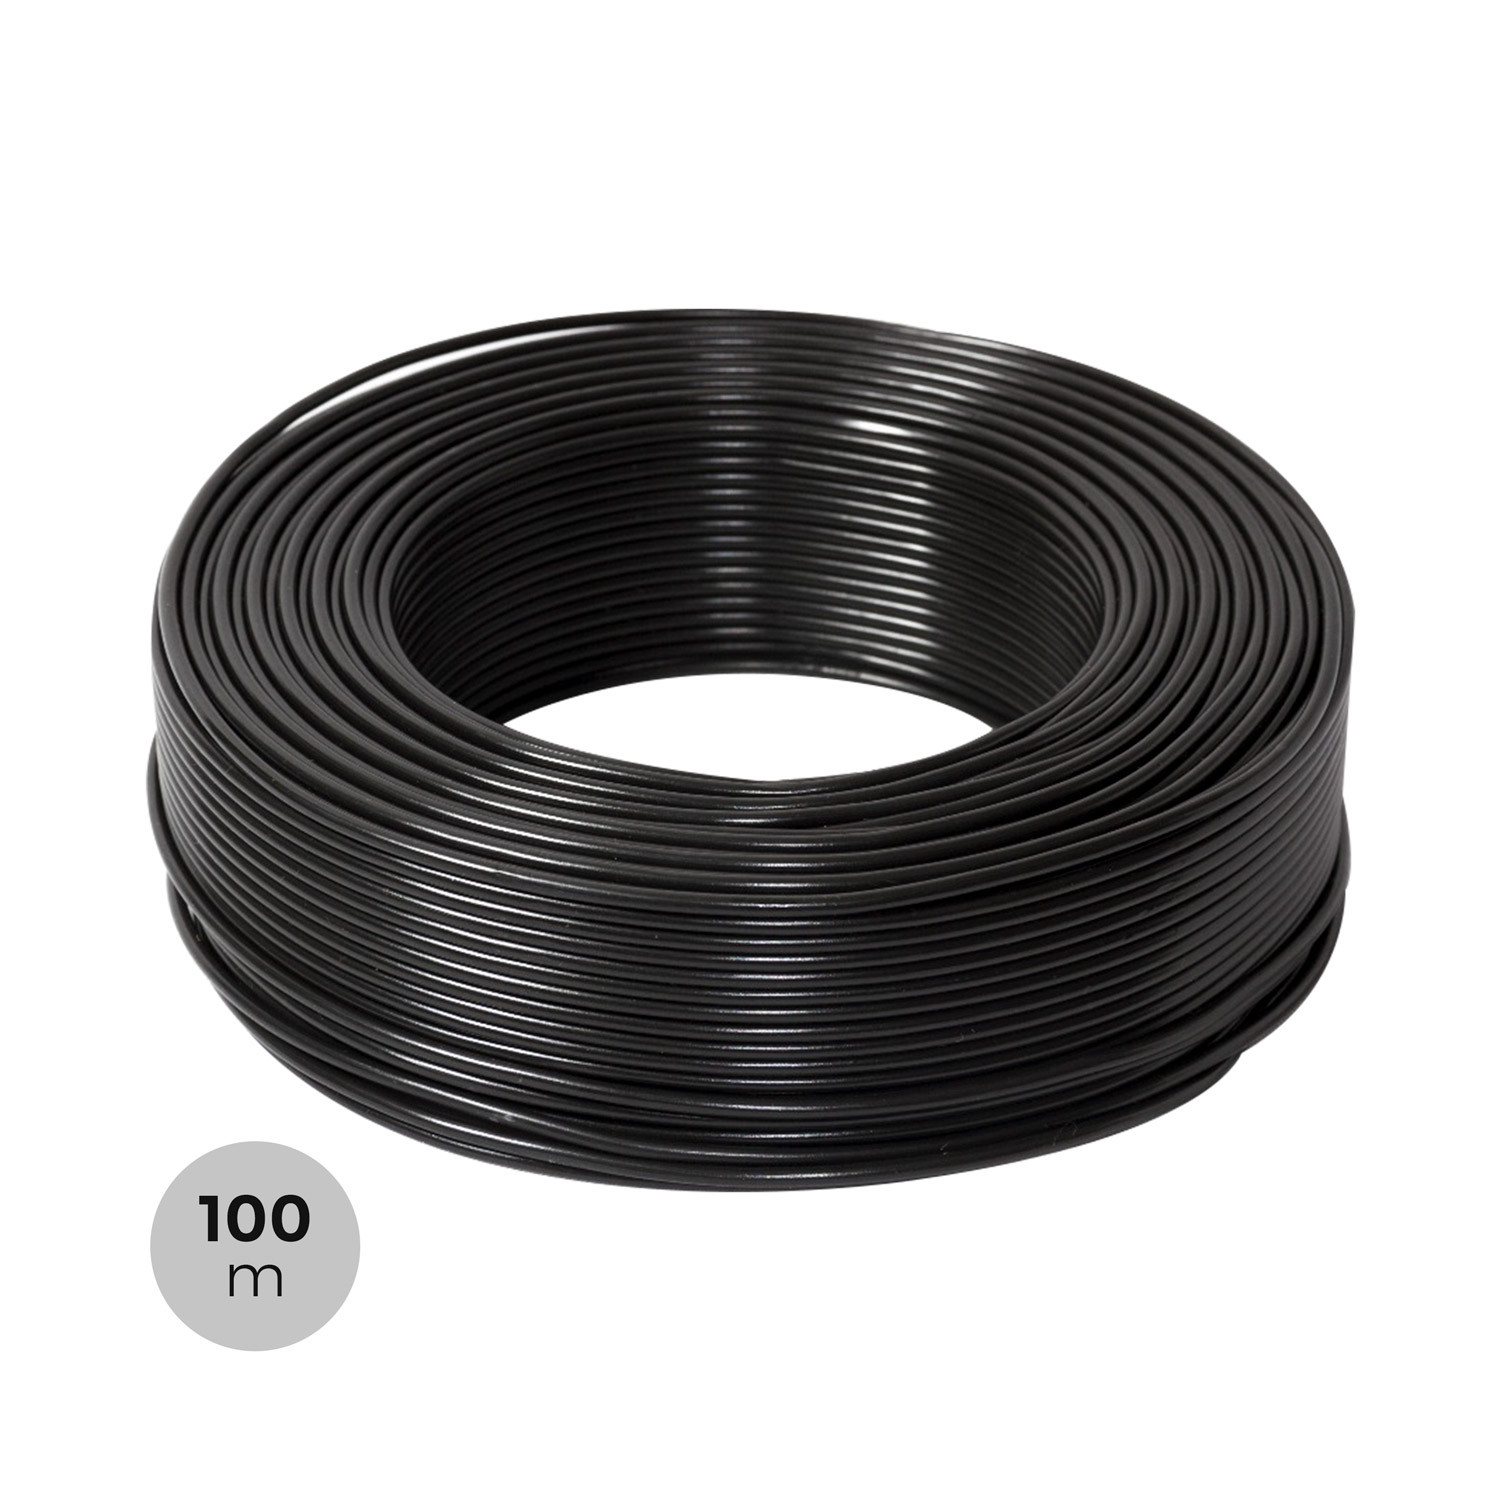 VARIOUS LENGTHS BROWN 1.5MM HEAT RESISTANT FIBRE INSULATED WIRE CABLE 1,5,10,25M 